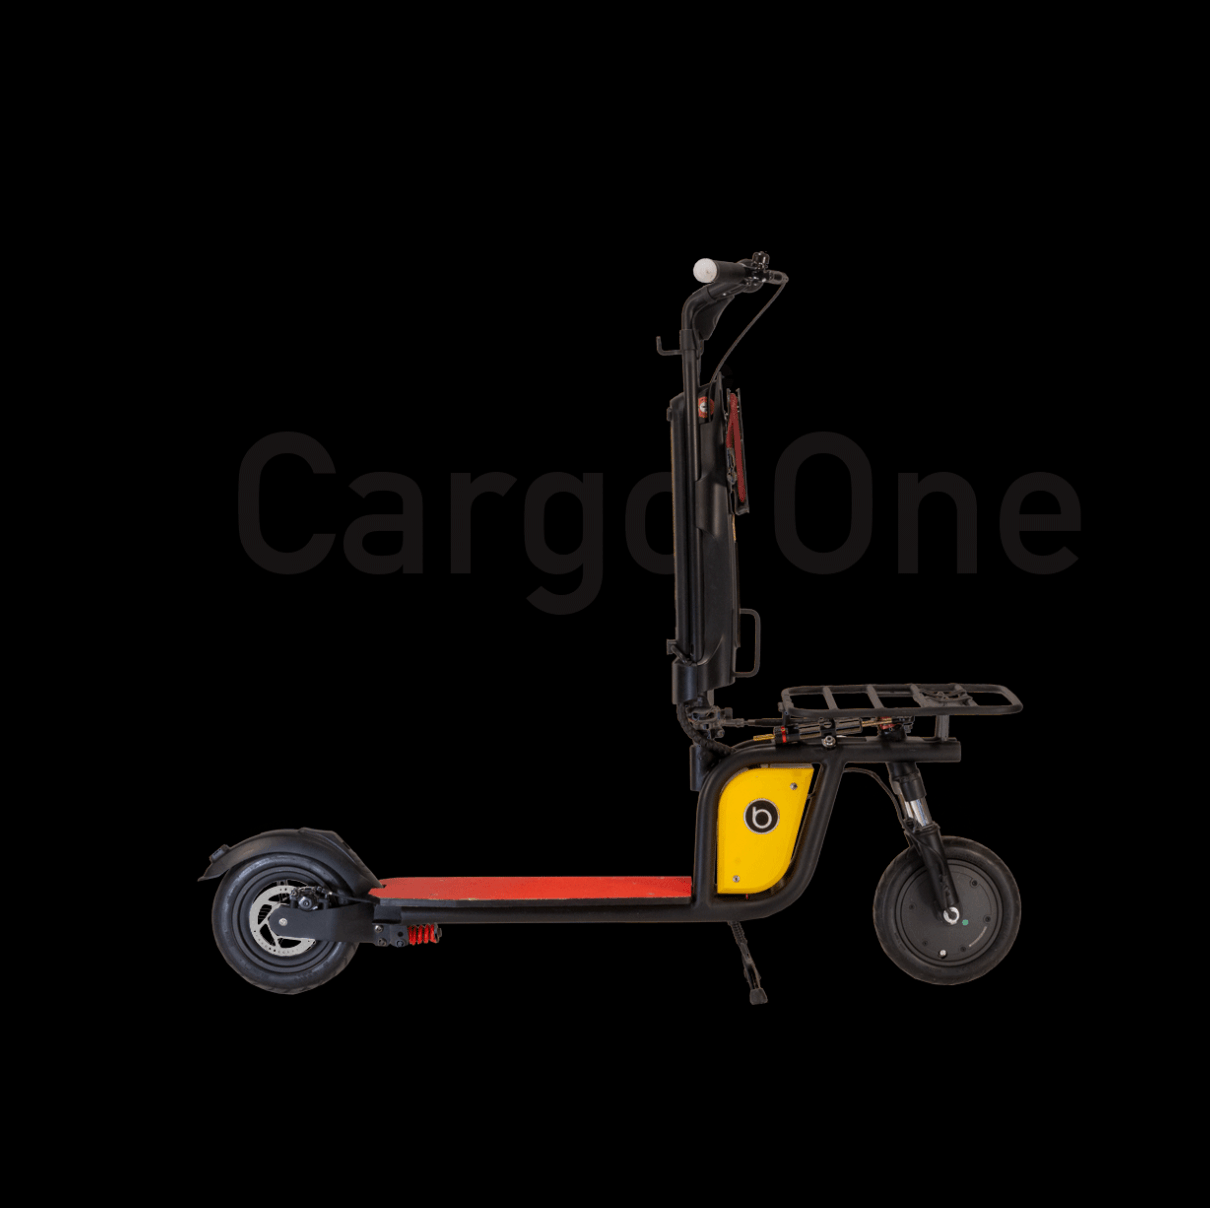 Beyond Cargo One Scooter